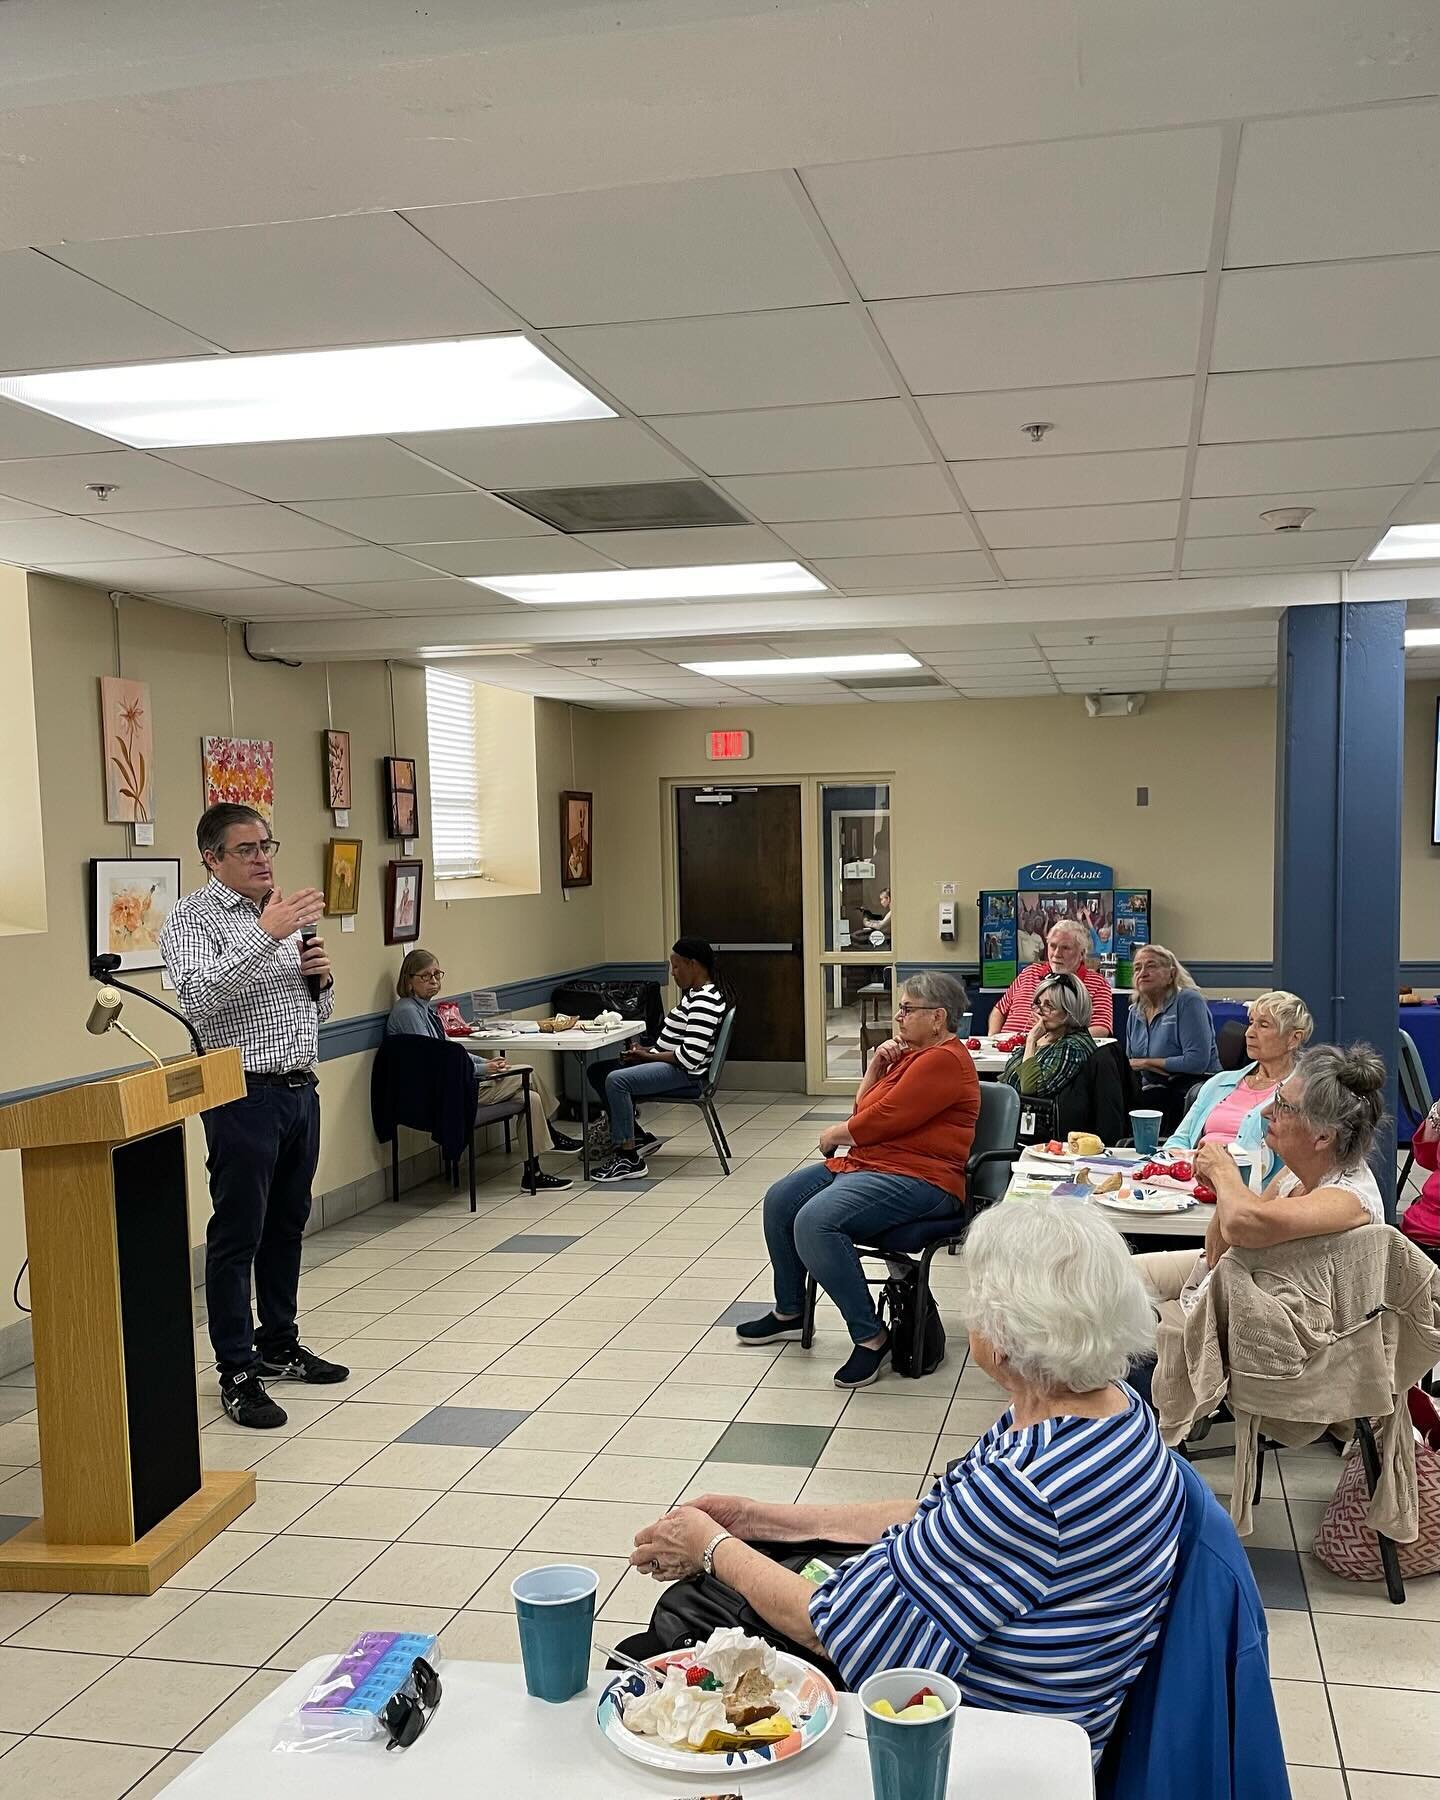 Advanced heart failure cardiologist Gian Giove, M.D. gave an engaging and informative talk on heart failure today at the Tallahassee Senior Center. Thank you to Tallahassee Memorial Healthcare for sponsoring this event and the senior center for hosti